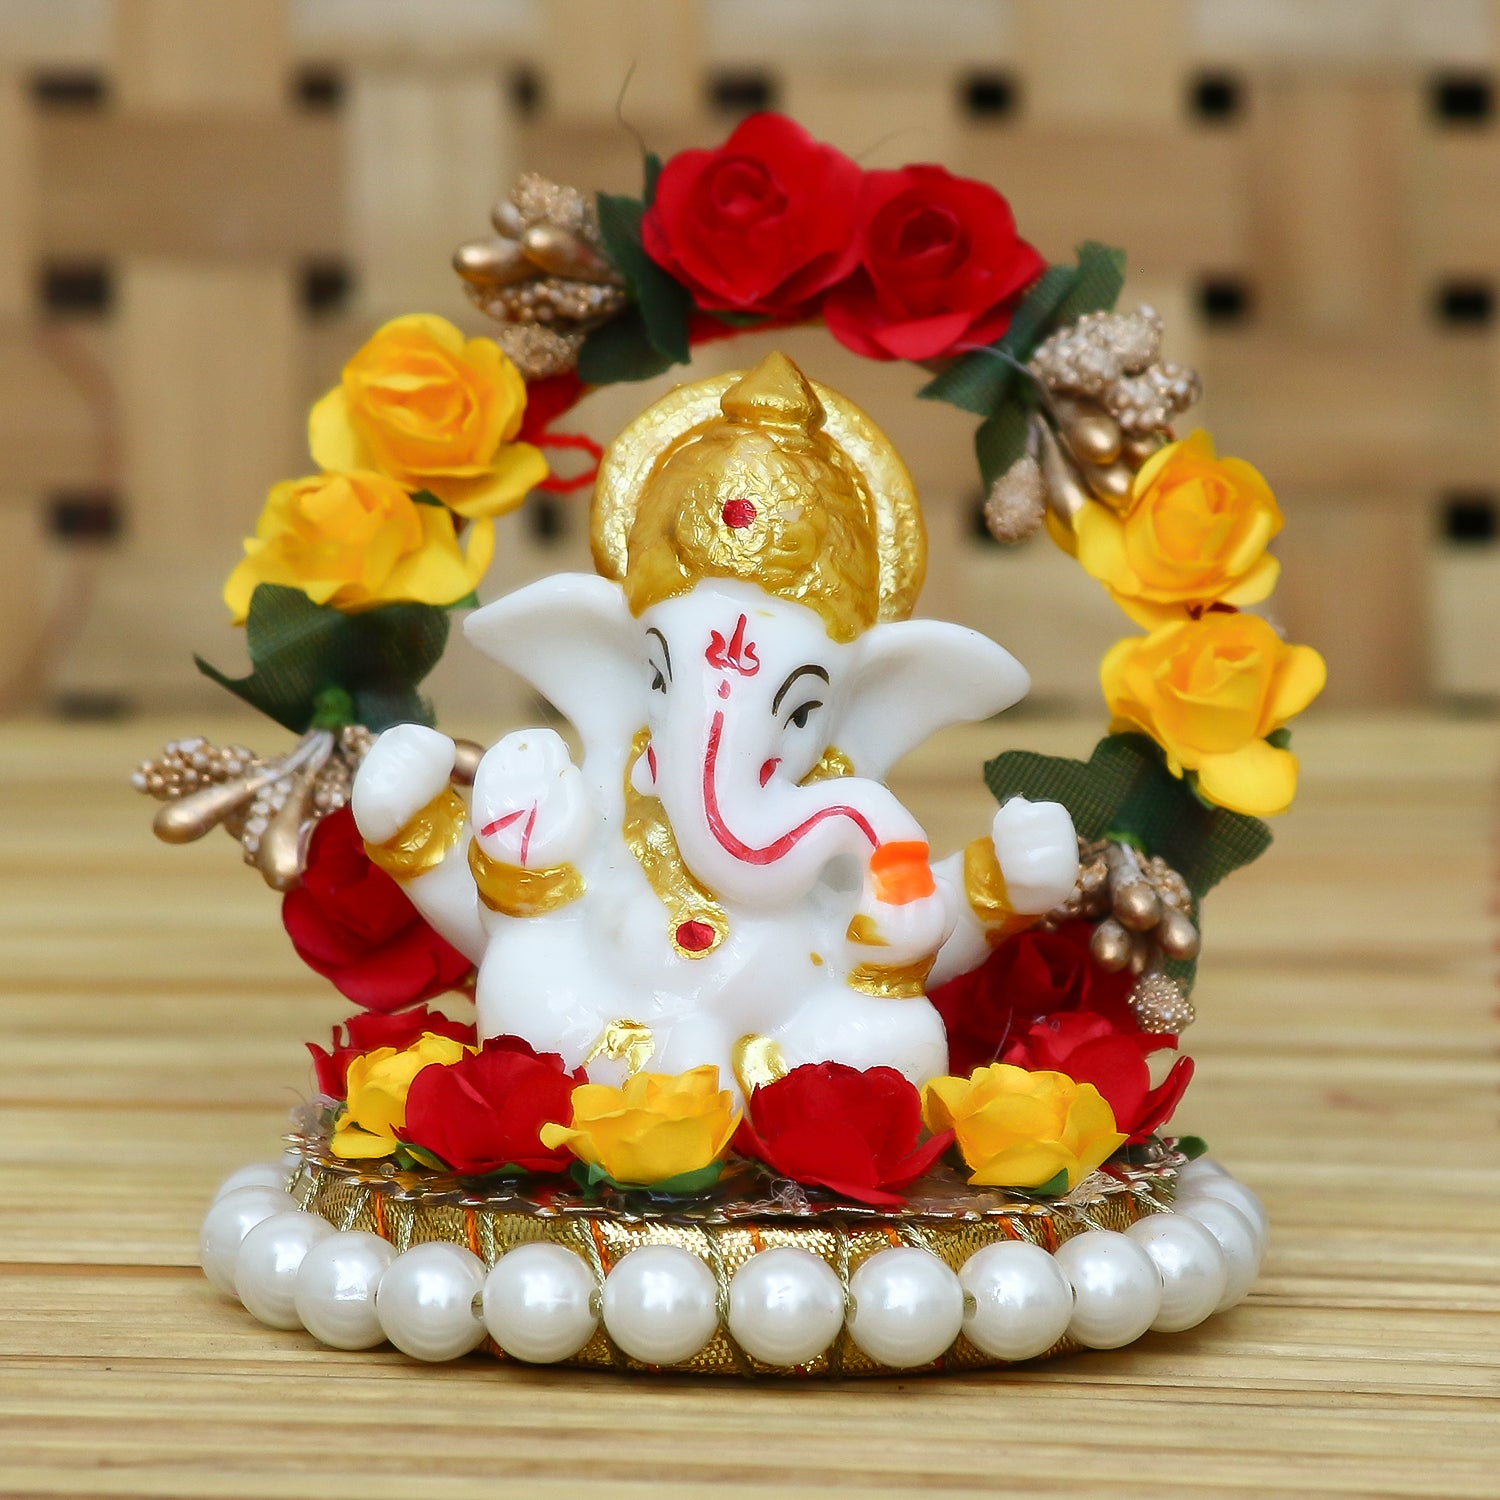 Polyresin Lord Ganesha Idol on Decorative Handcrafted Rose Flower Plate for Home and Car Dashboard